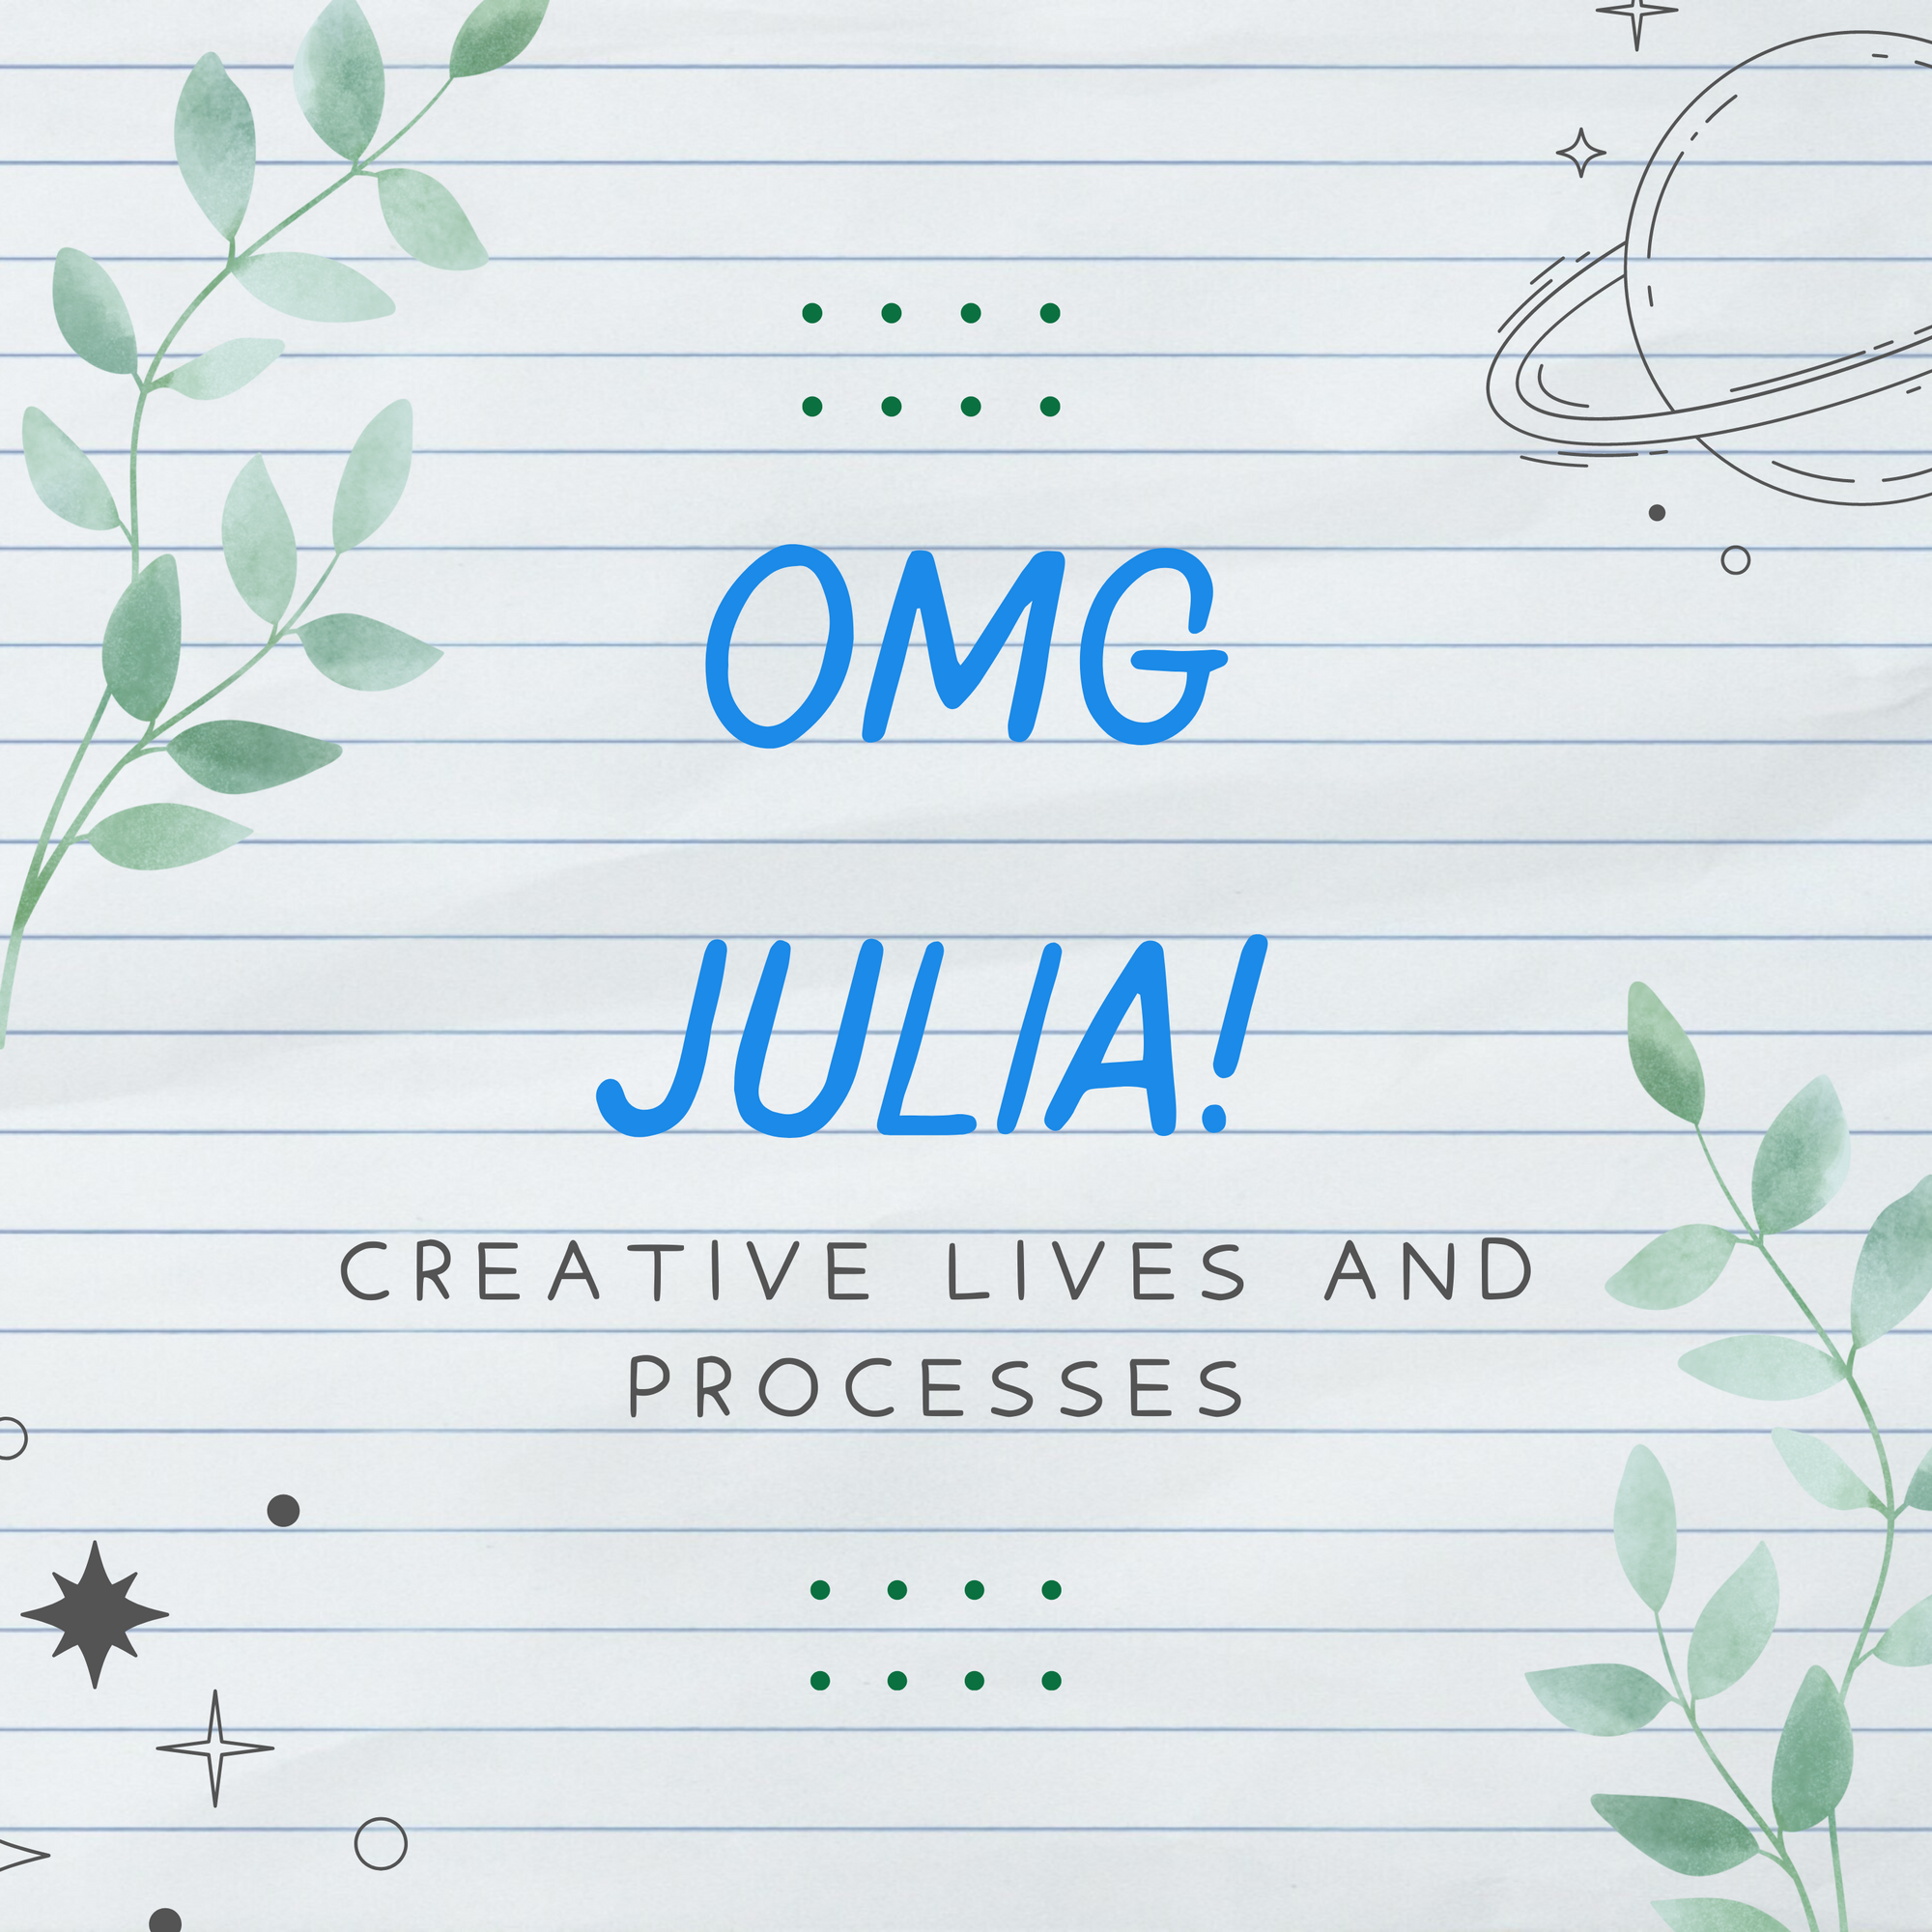 The OMG Julia! Creative Lives and Processes podcast logo with blue text on a lined notebook paper background. Doodles of leaves and stars and planets frame the text. 